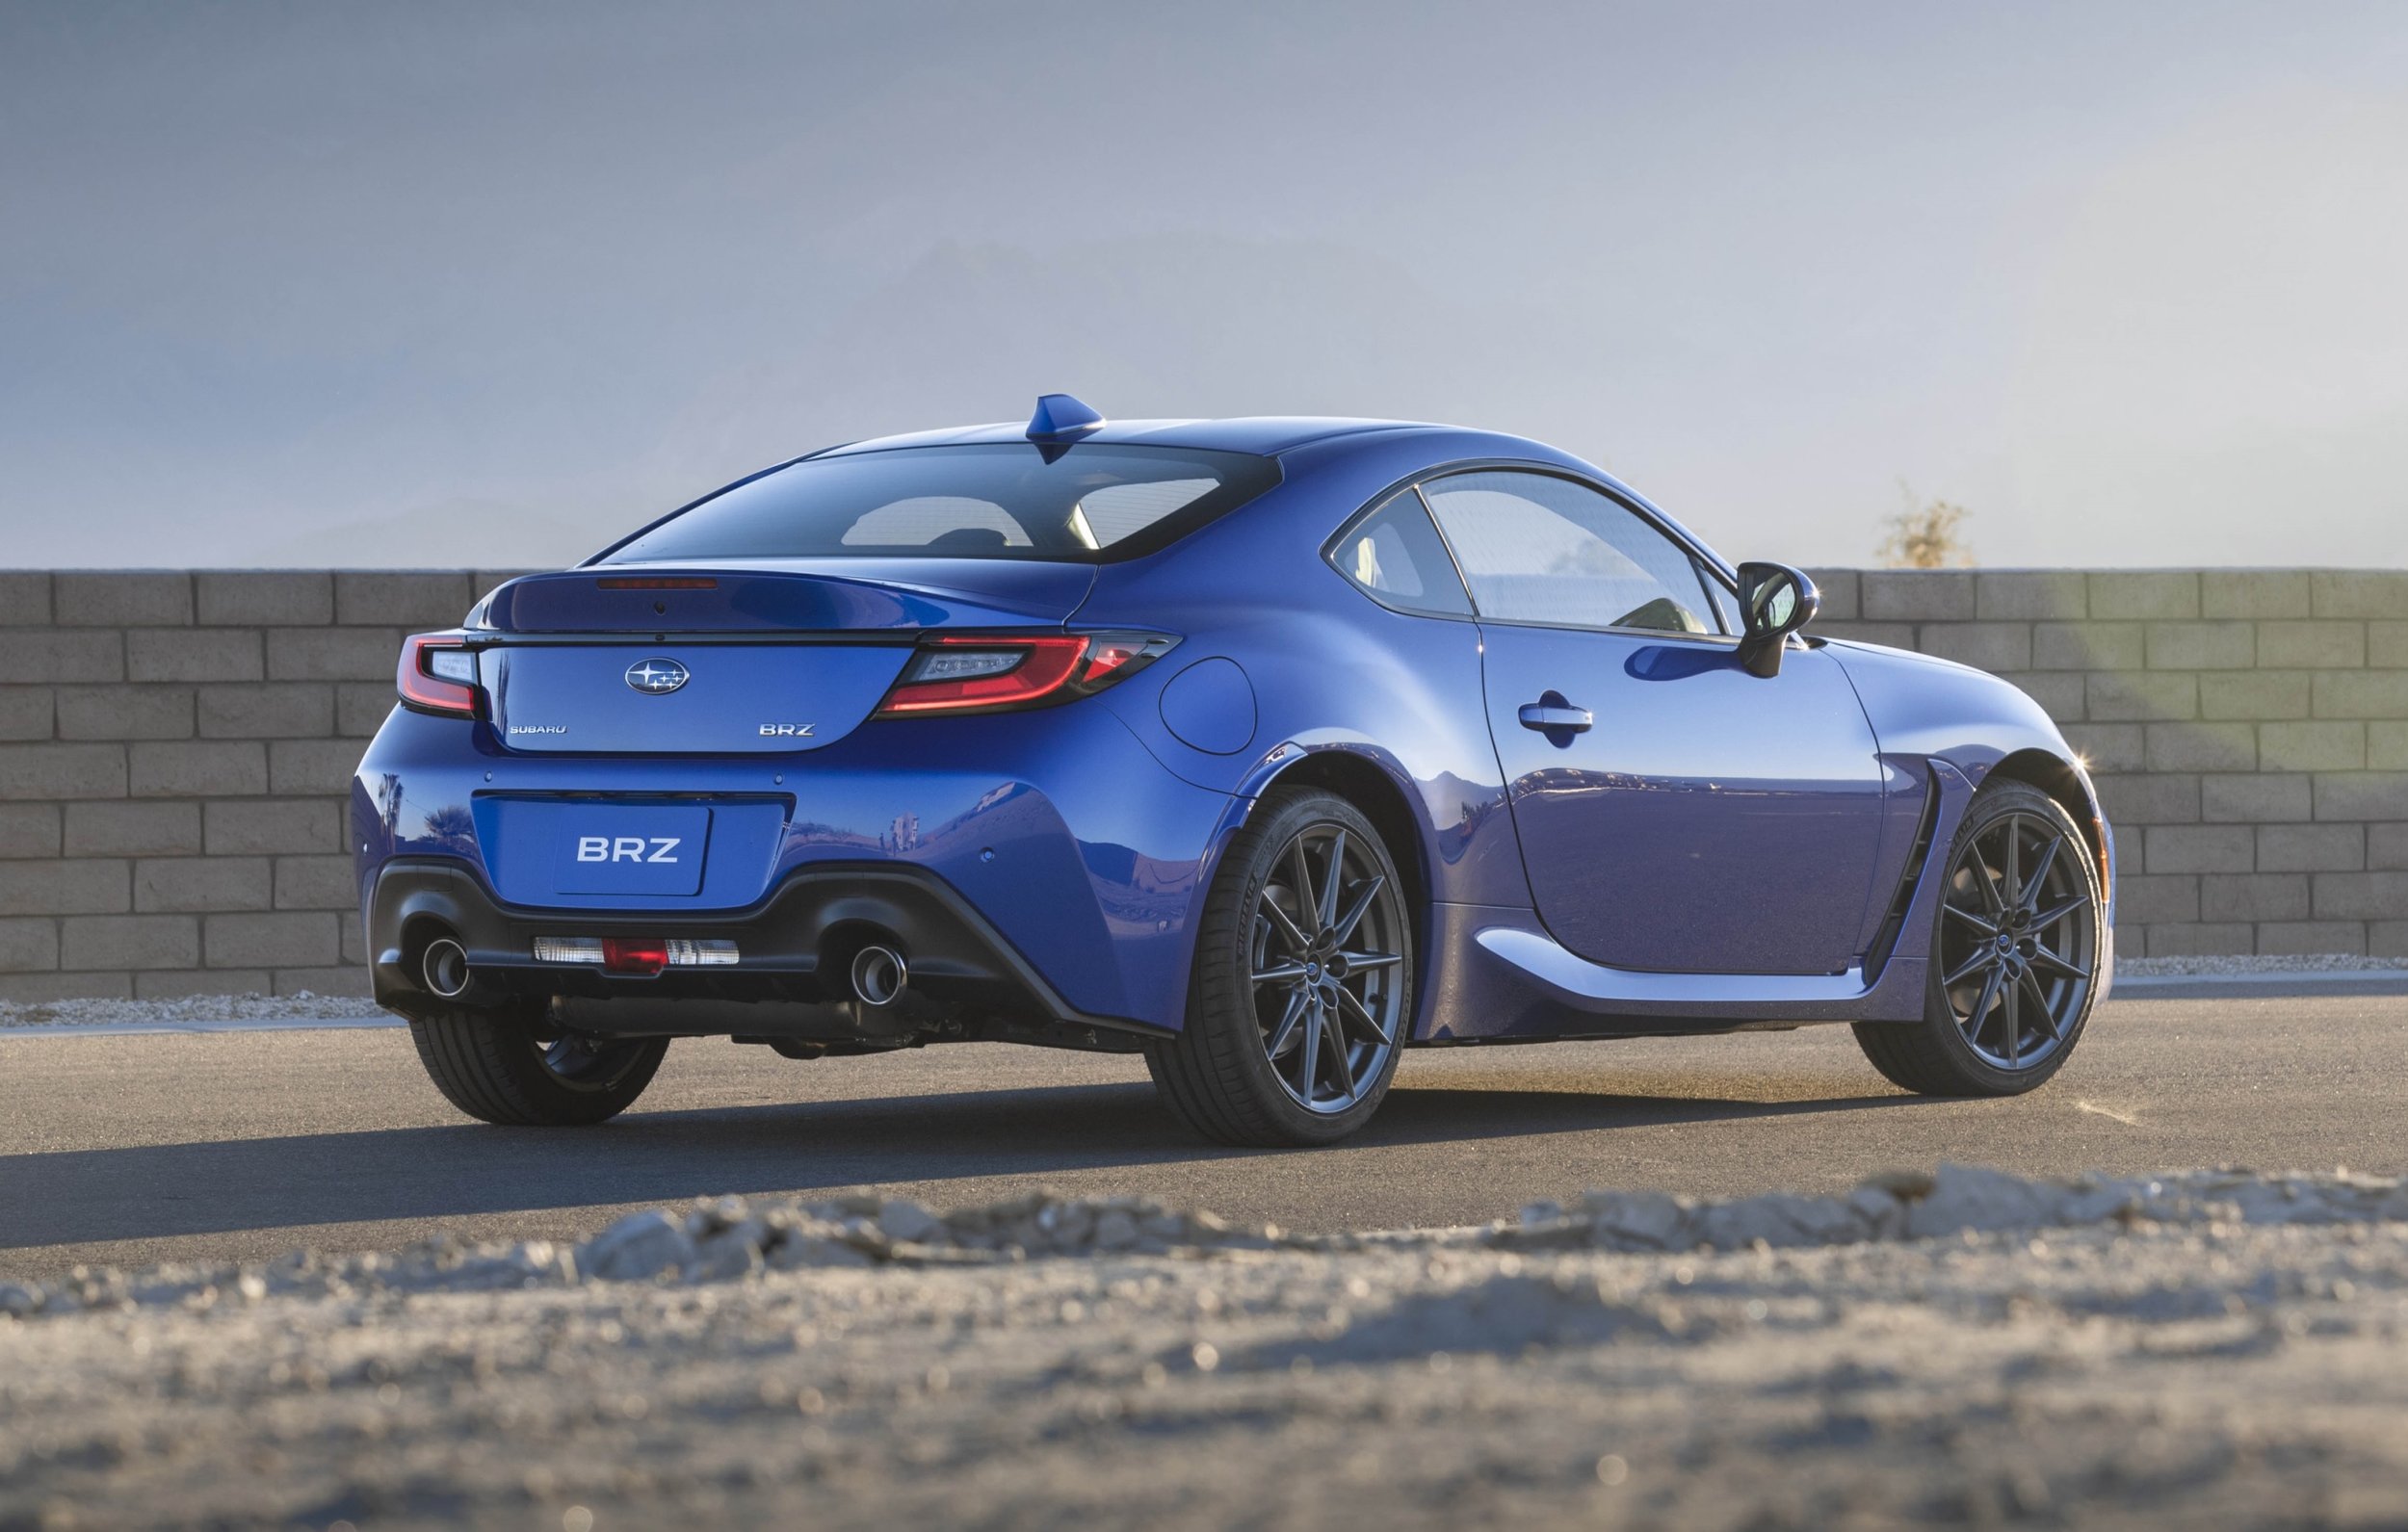 BRZ: 2 doors (4 seats), 1307kg, 0-100kph officially unknown...